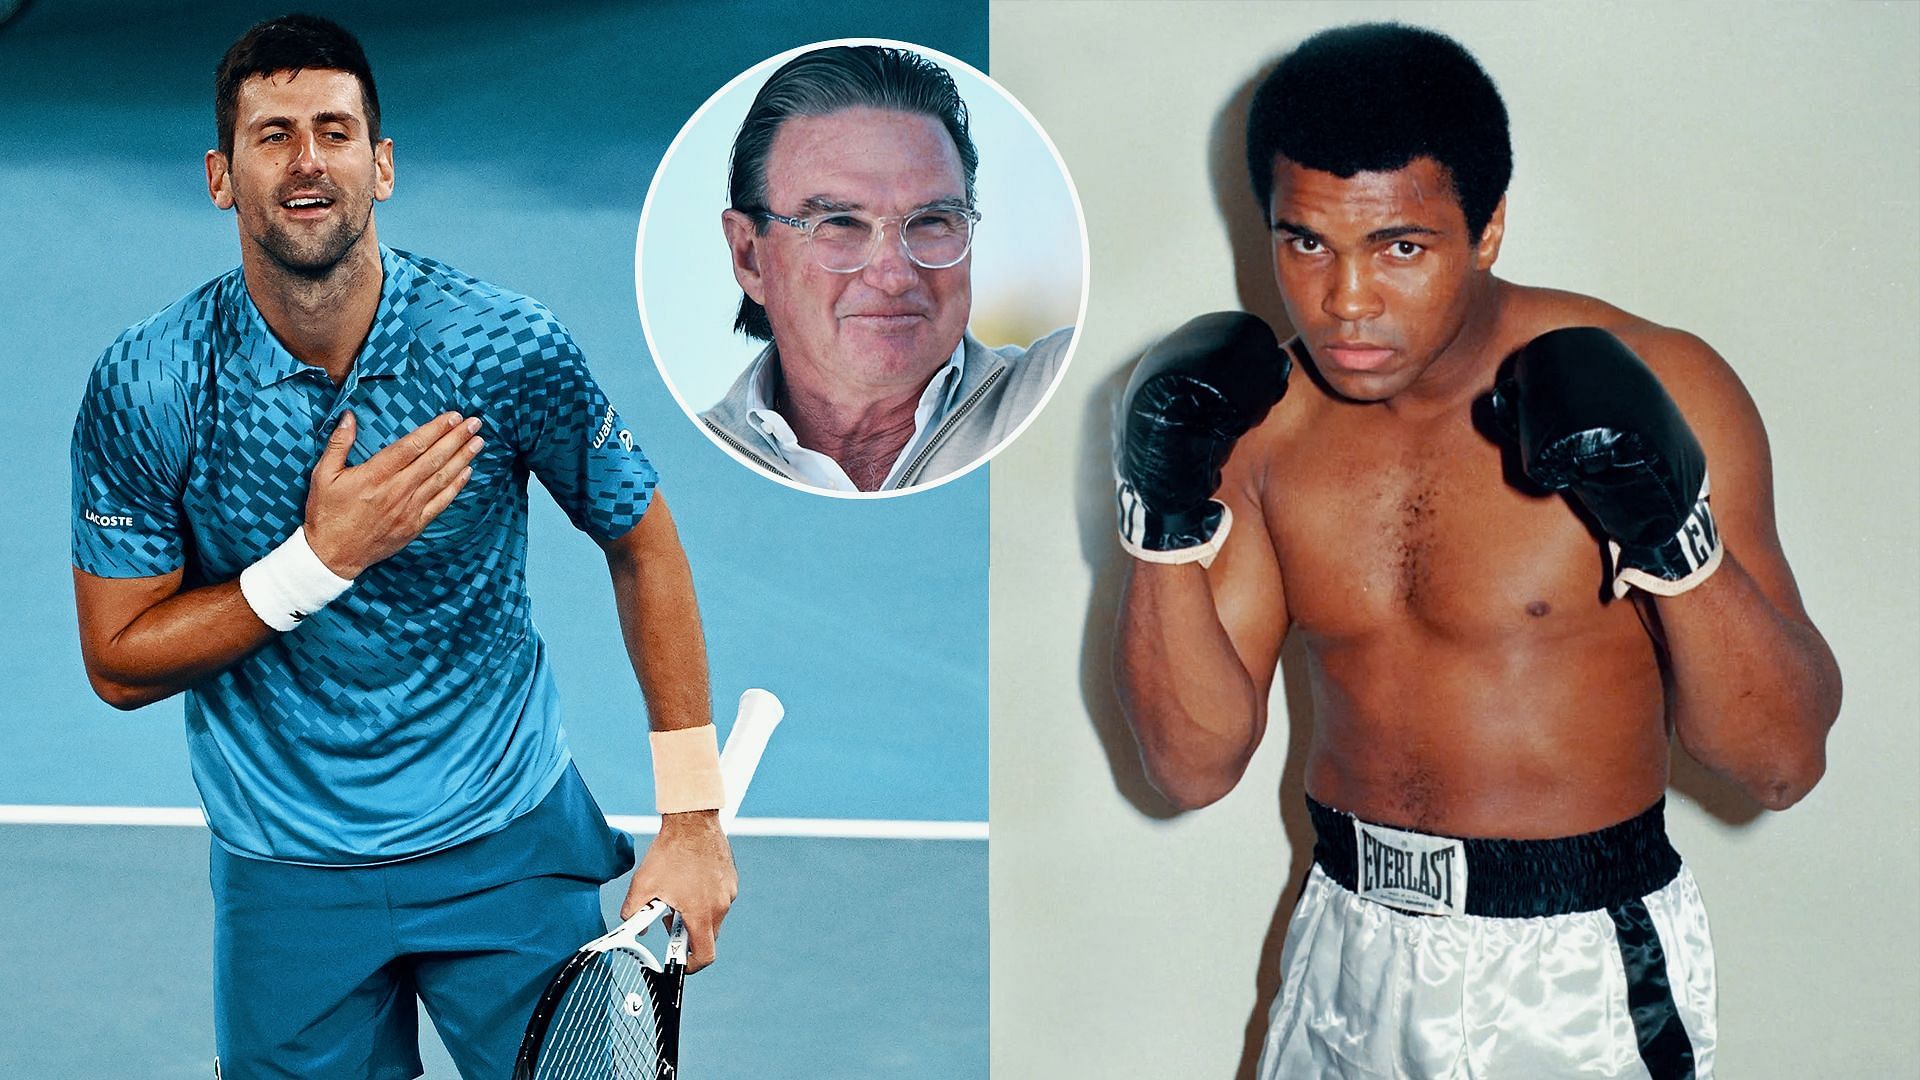 Jimmy Connors has compared Novak Djokovic with Muhammad Ali.